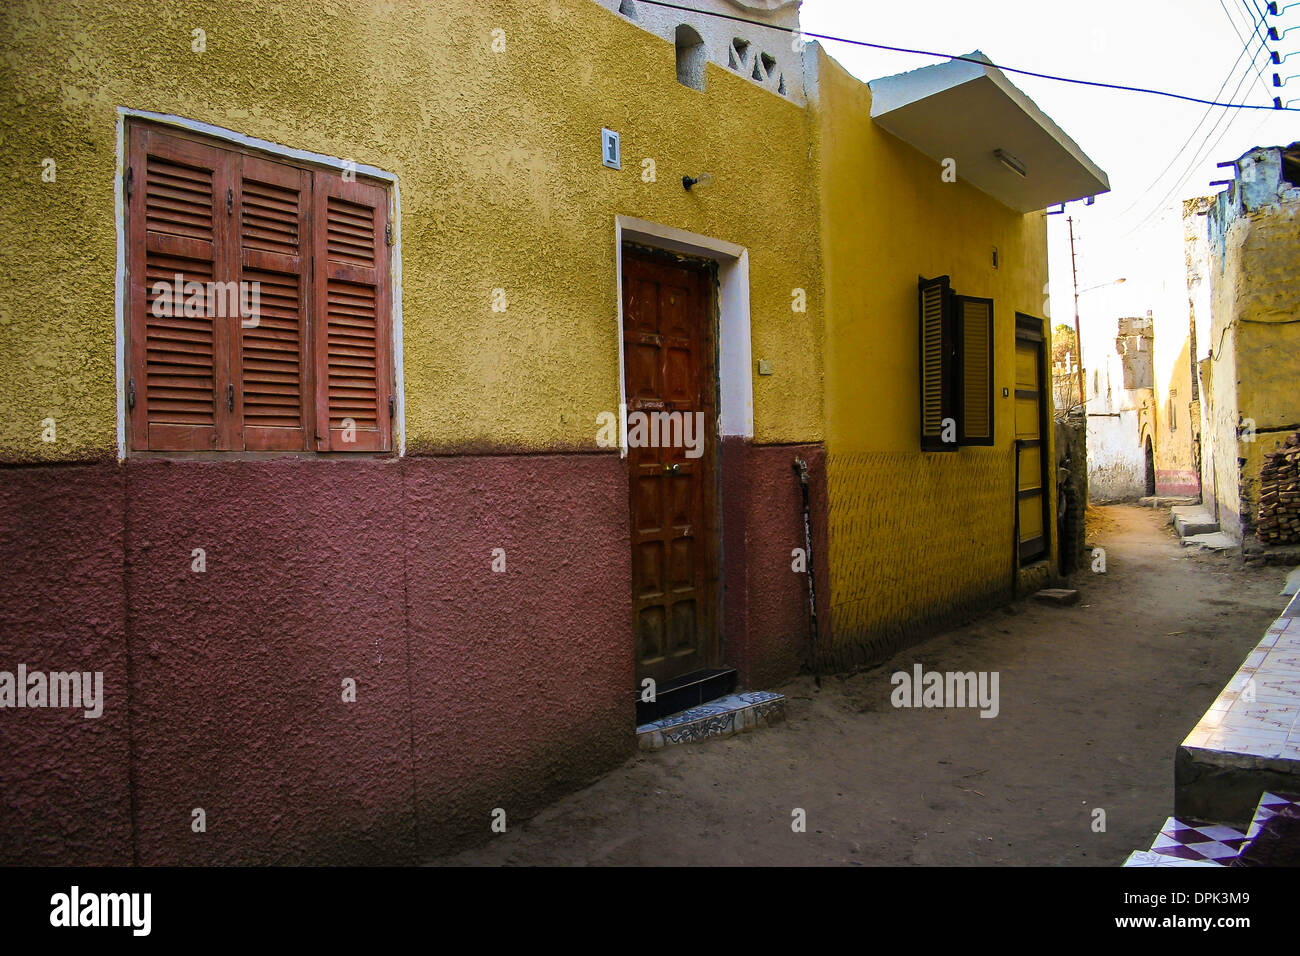 Colorful buildings and homes on Elephantine Island in Aswan, Egypt. Stock Photo